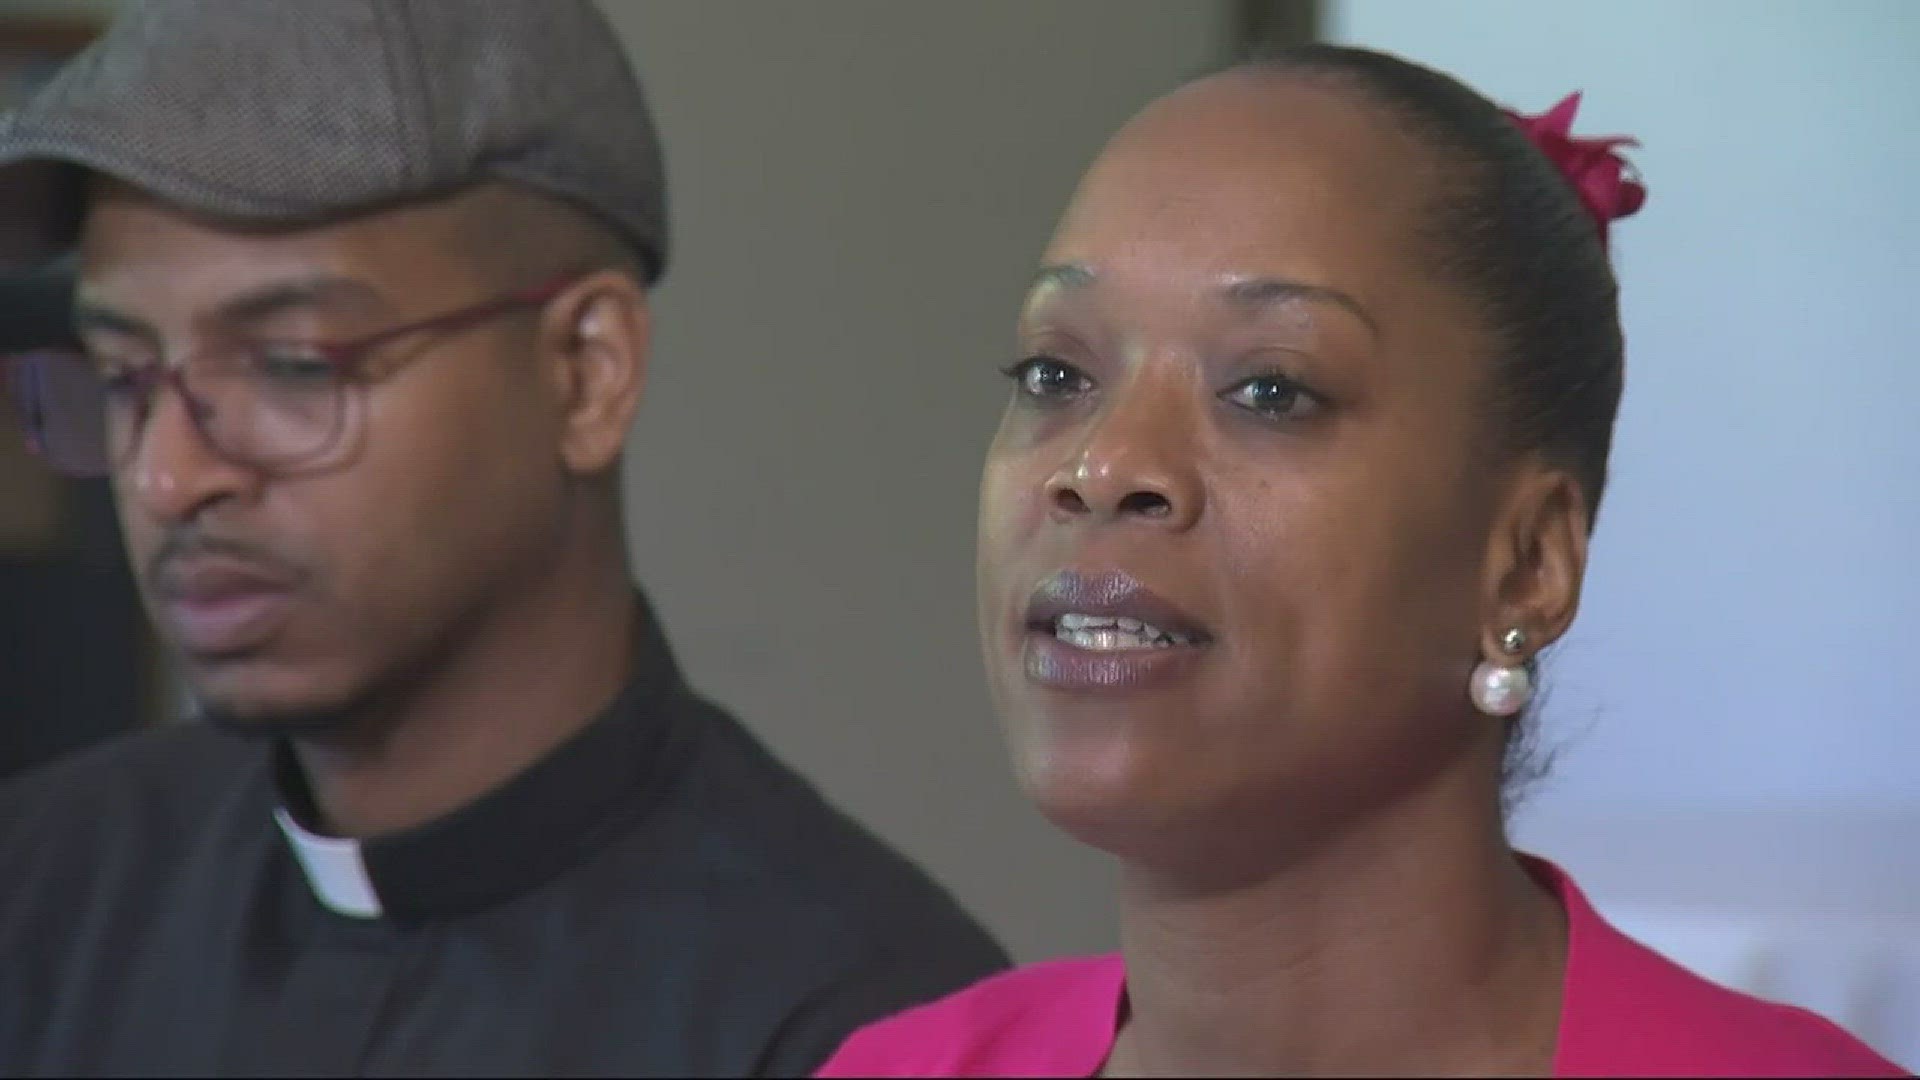 'Stop the hate': MAX train assault victim speaks out